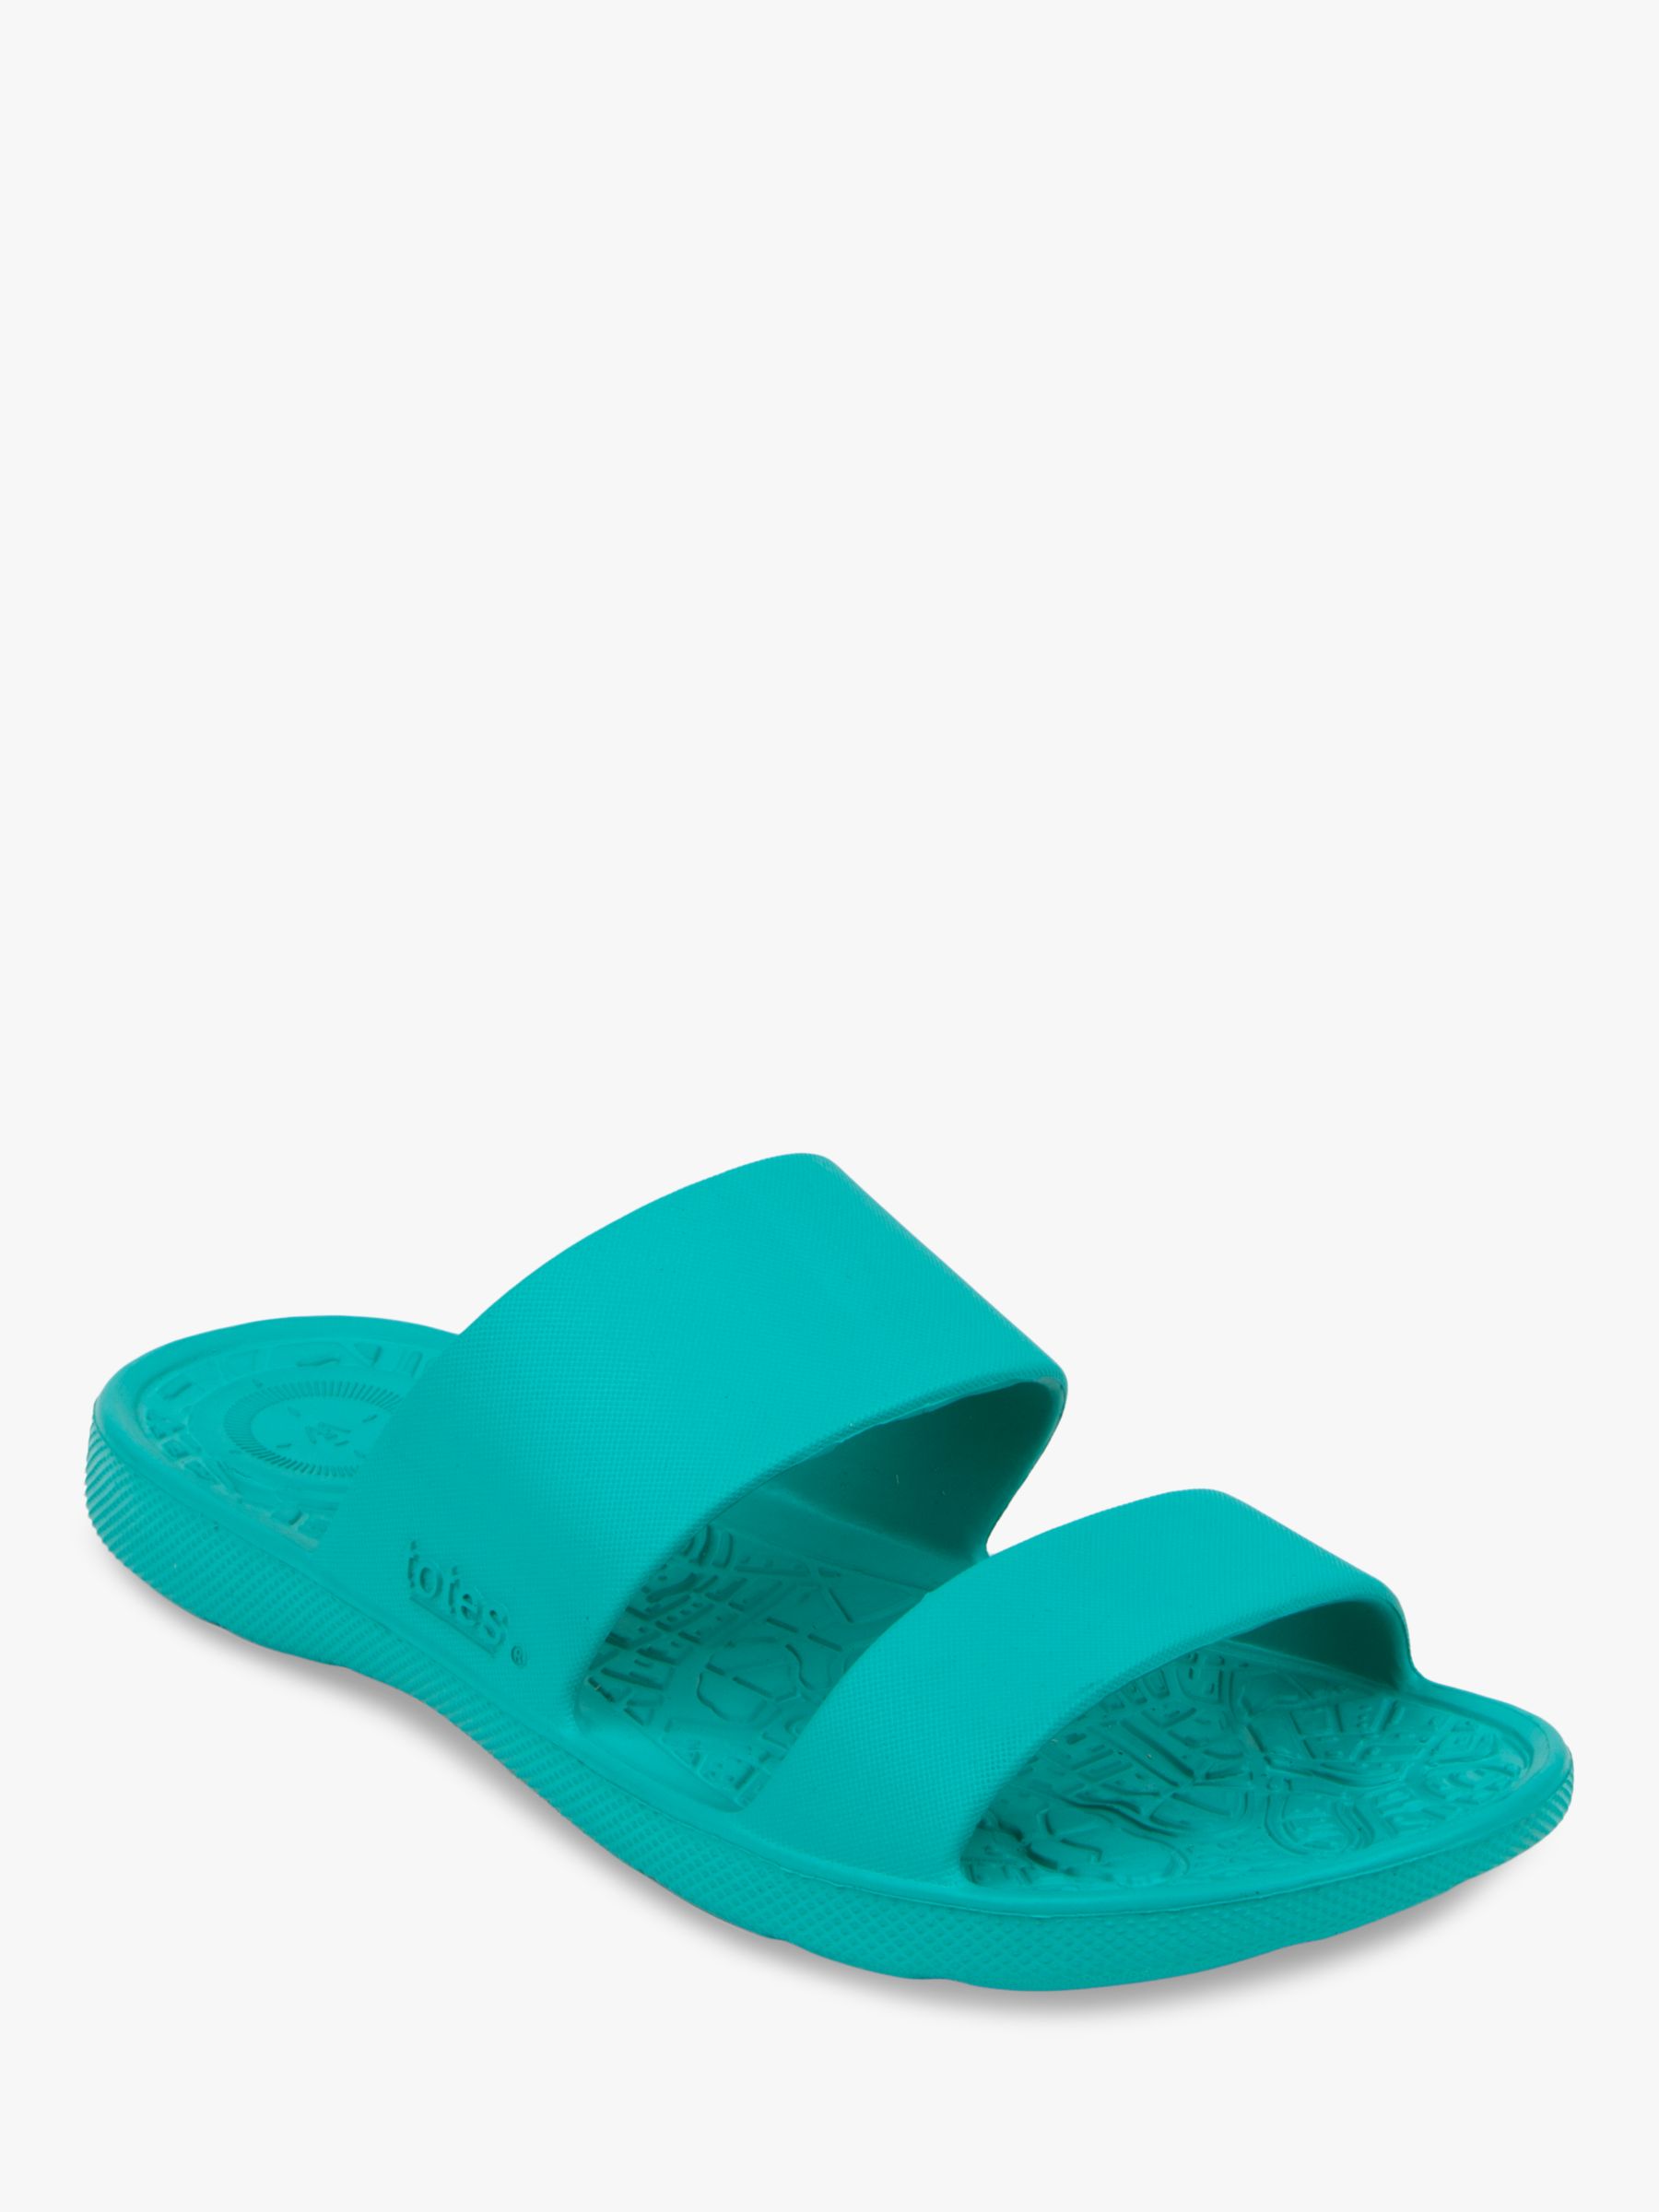 totes SOLBOUNCE Double Strap Slider Sandals, Turquoise at John Lewis ...